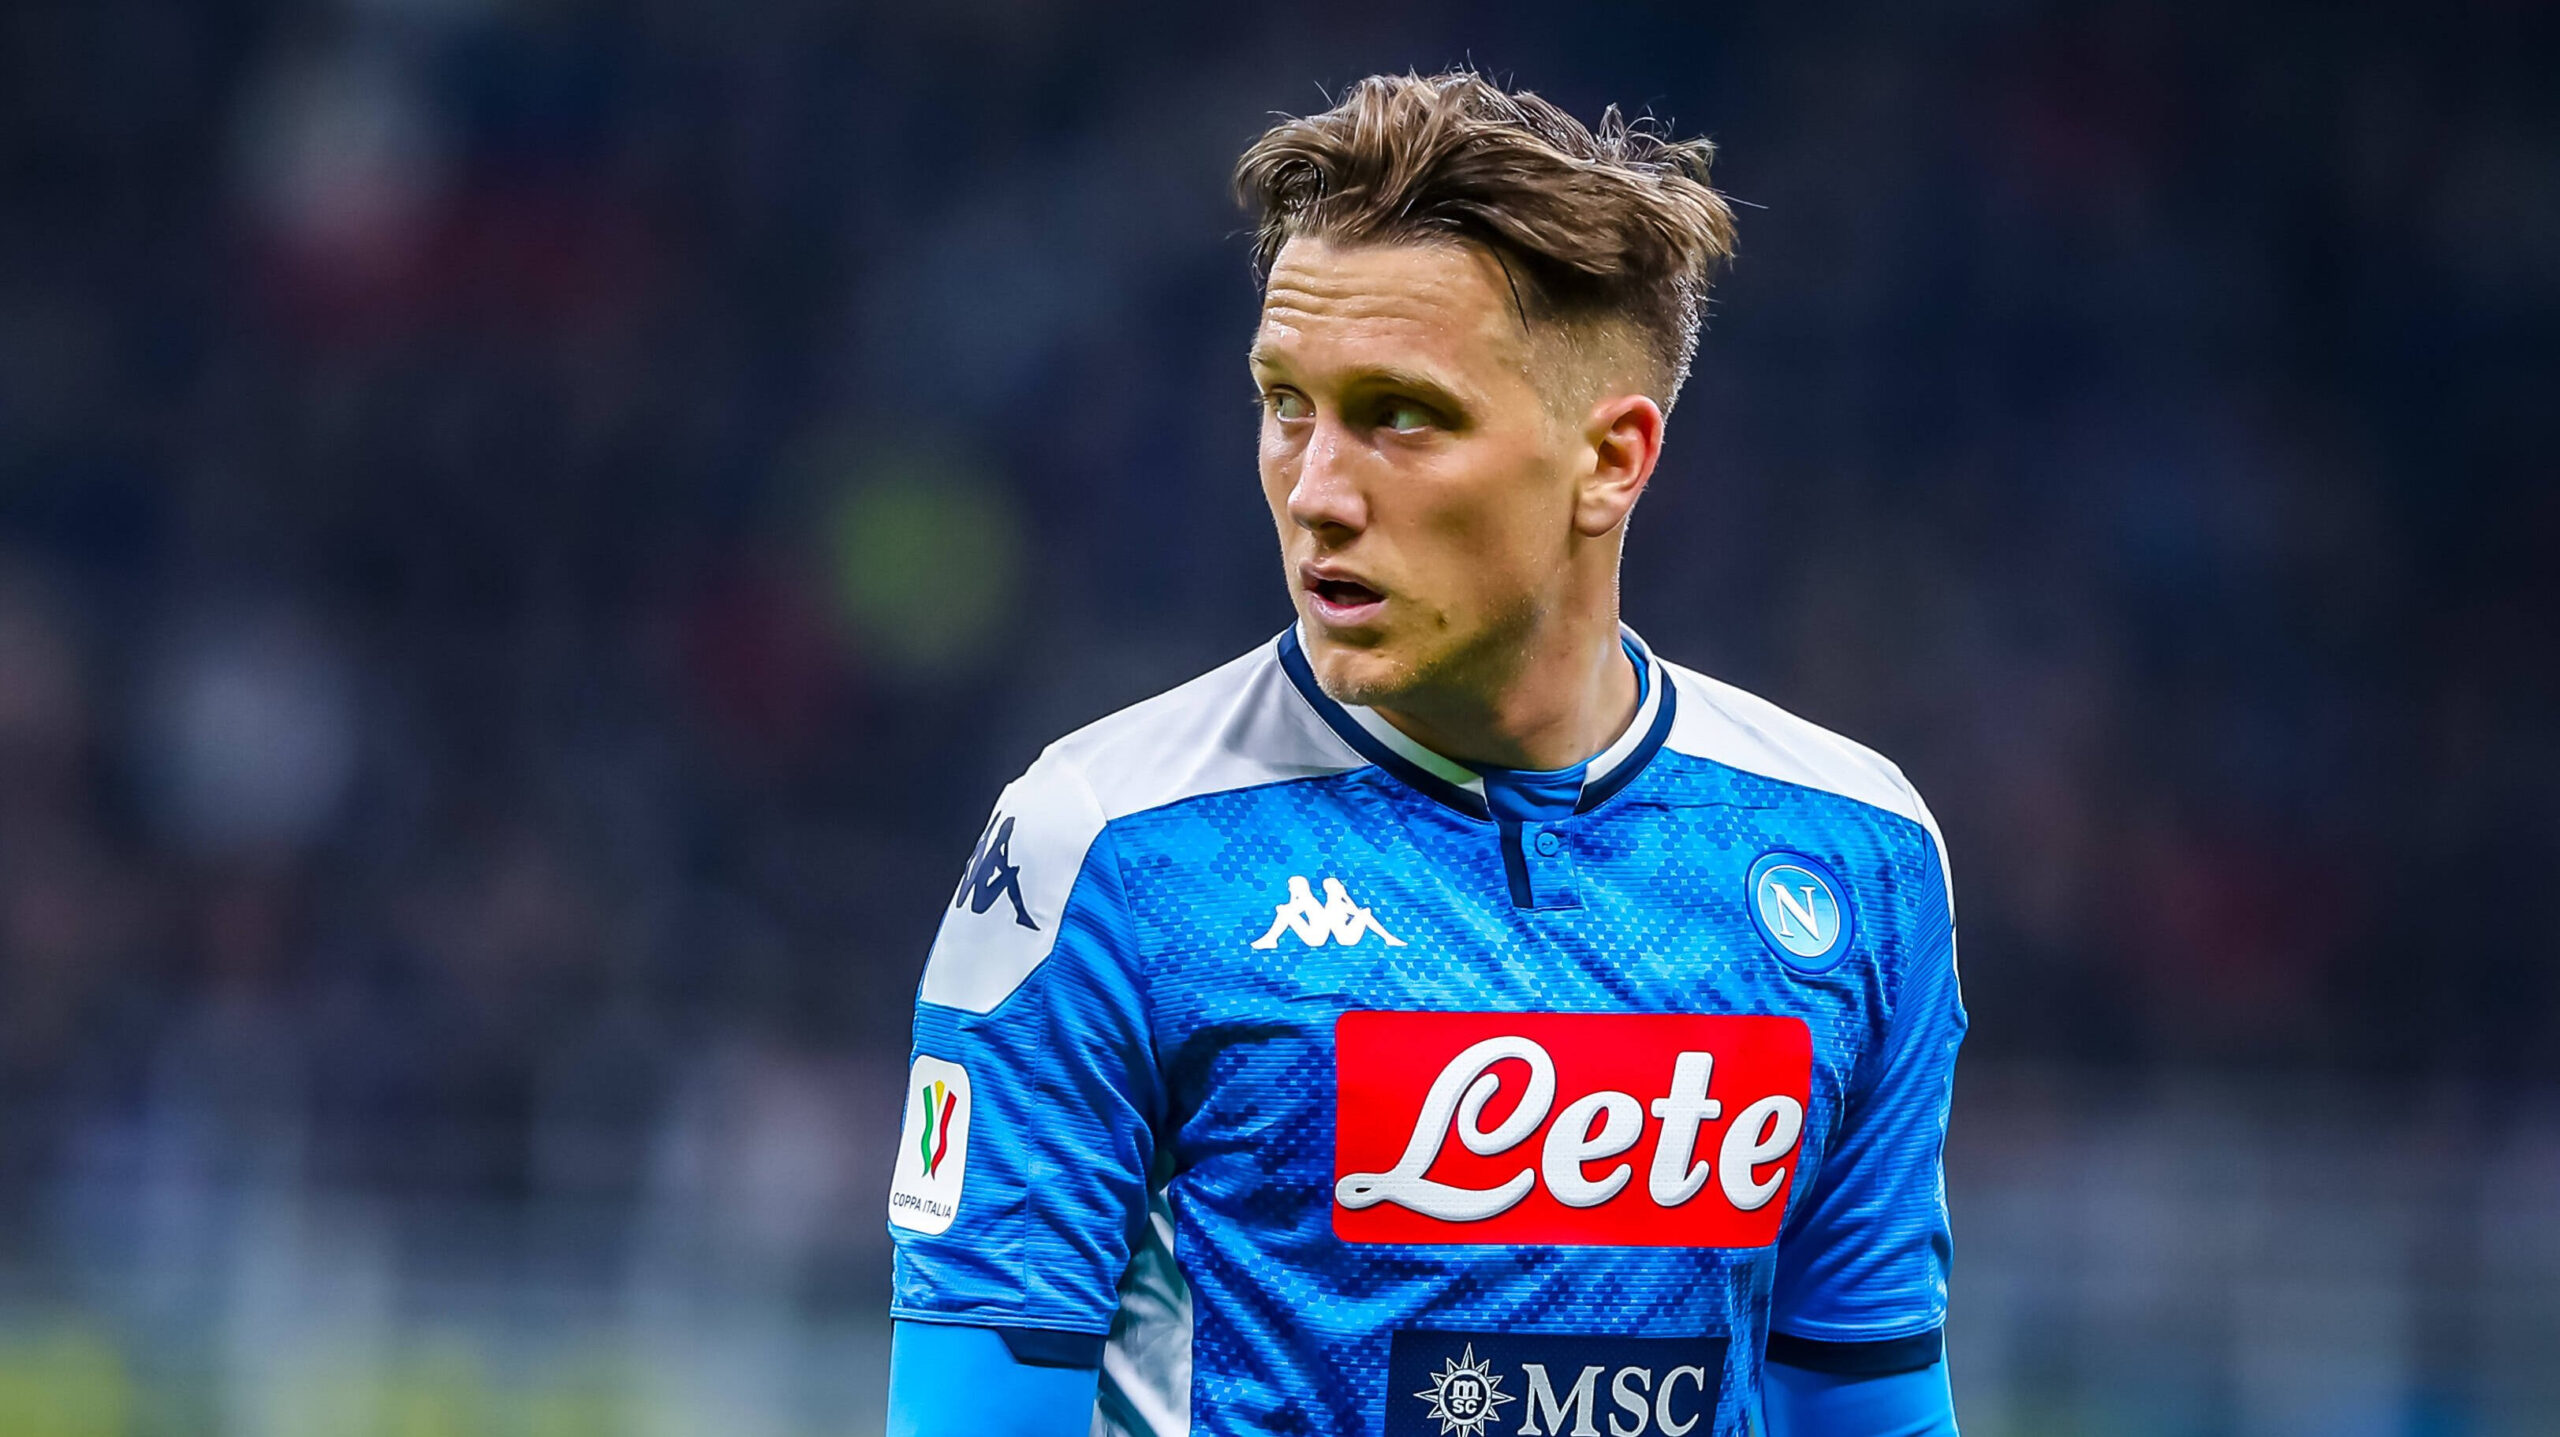 Report: Zielinski postitive for COVID19. What did Serie A know and when did they know it?